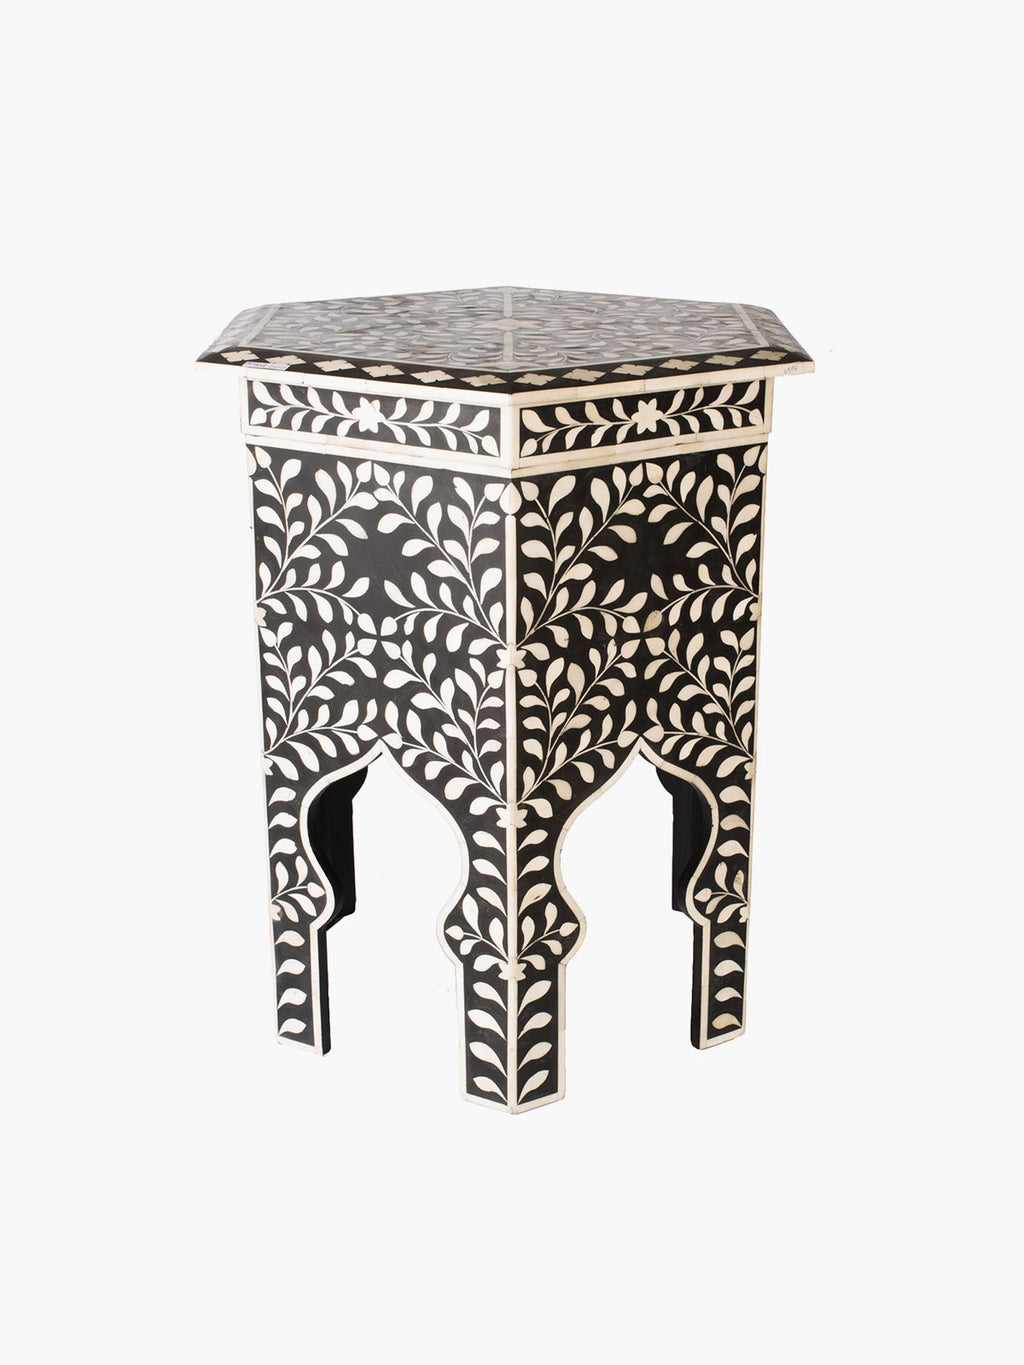 55cm Hexagonal Side Table With Floral Design